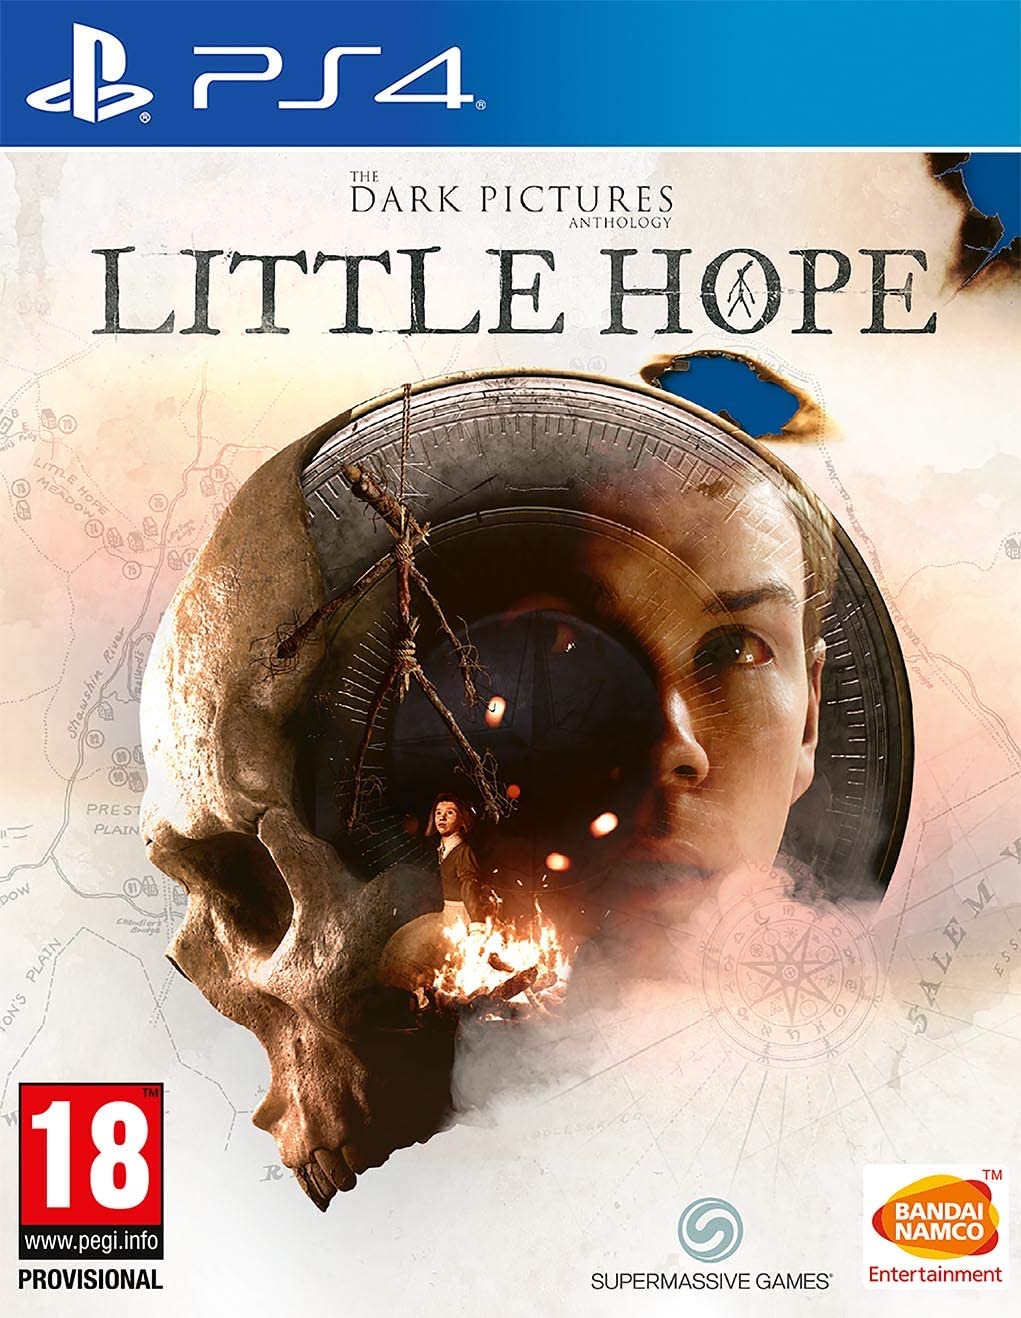 download the dark anthology little hope for free